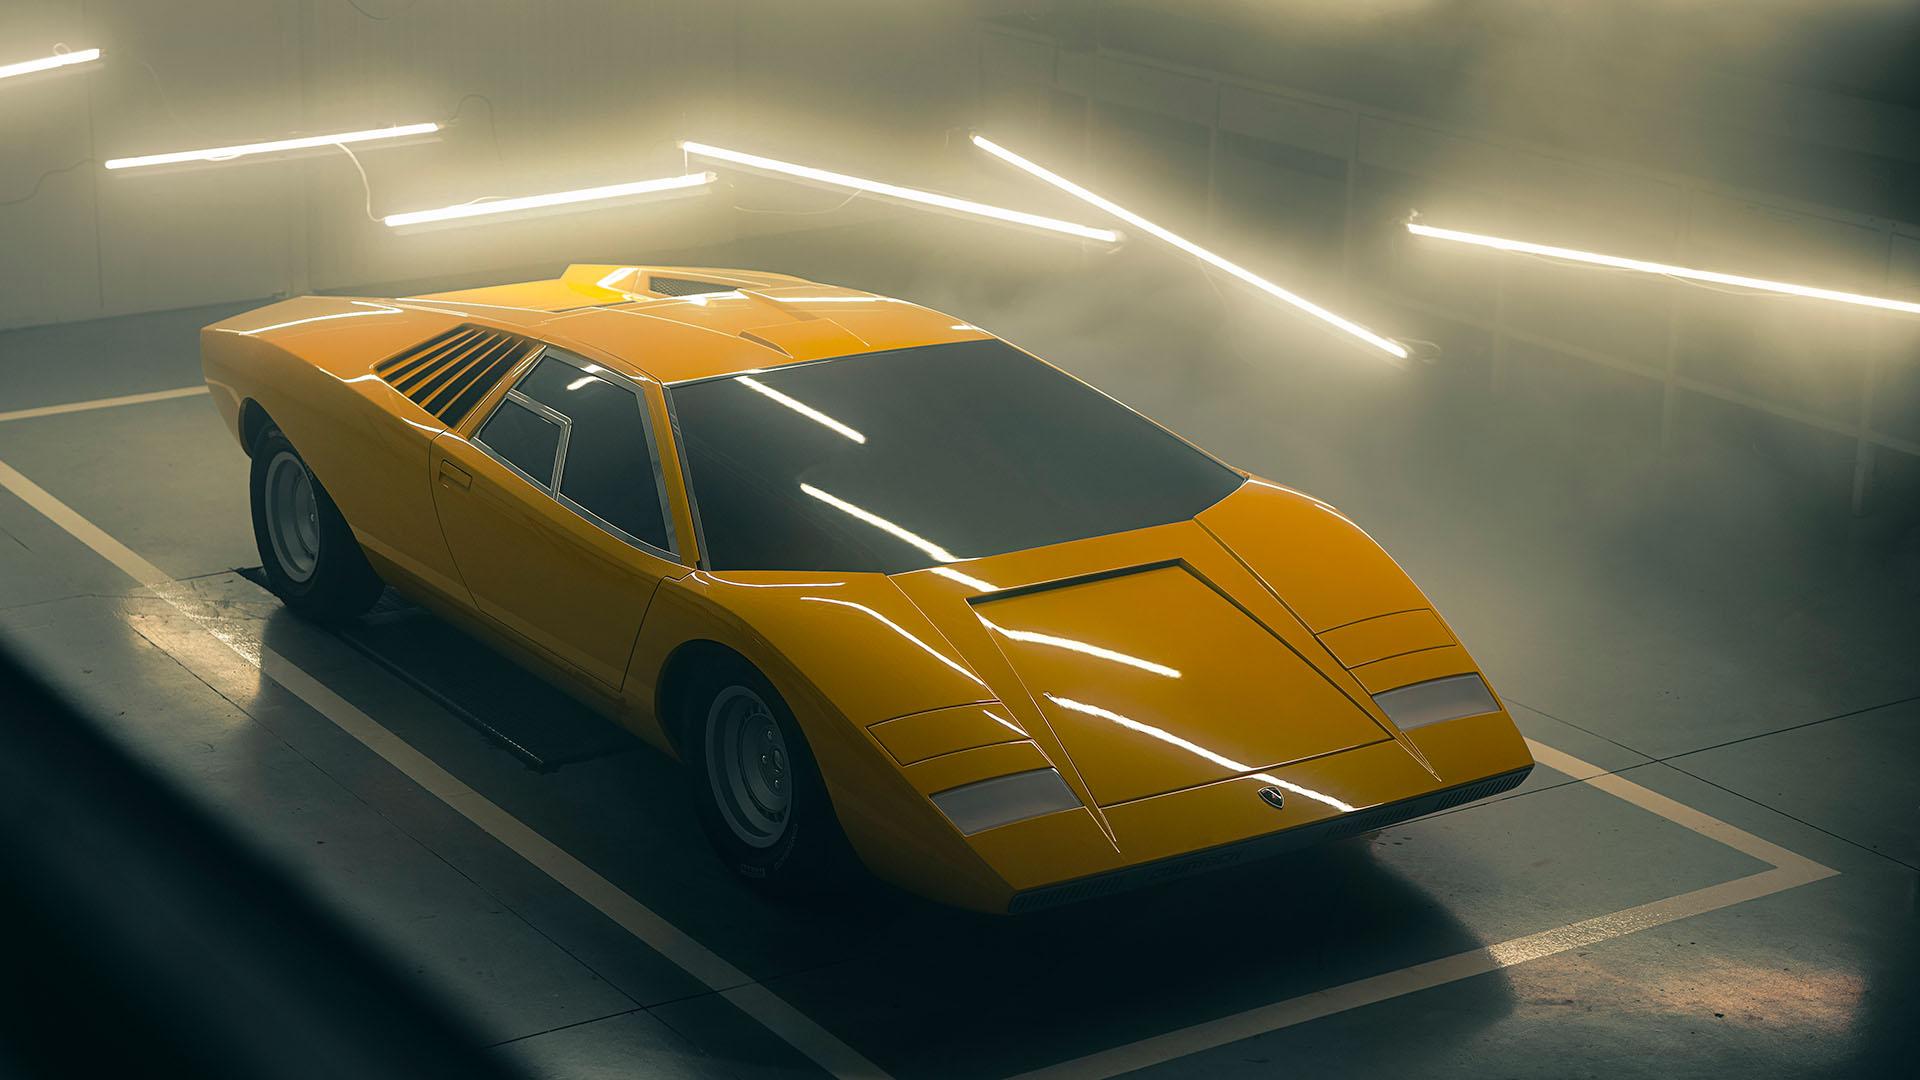 The countach lp500 is back 1